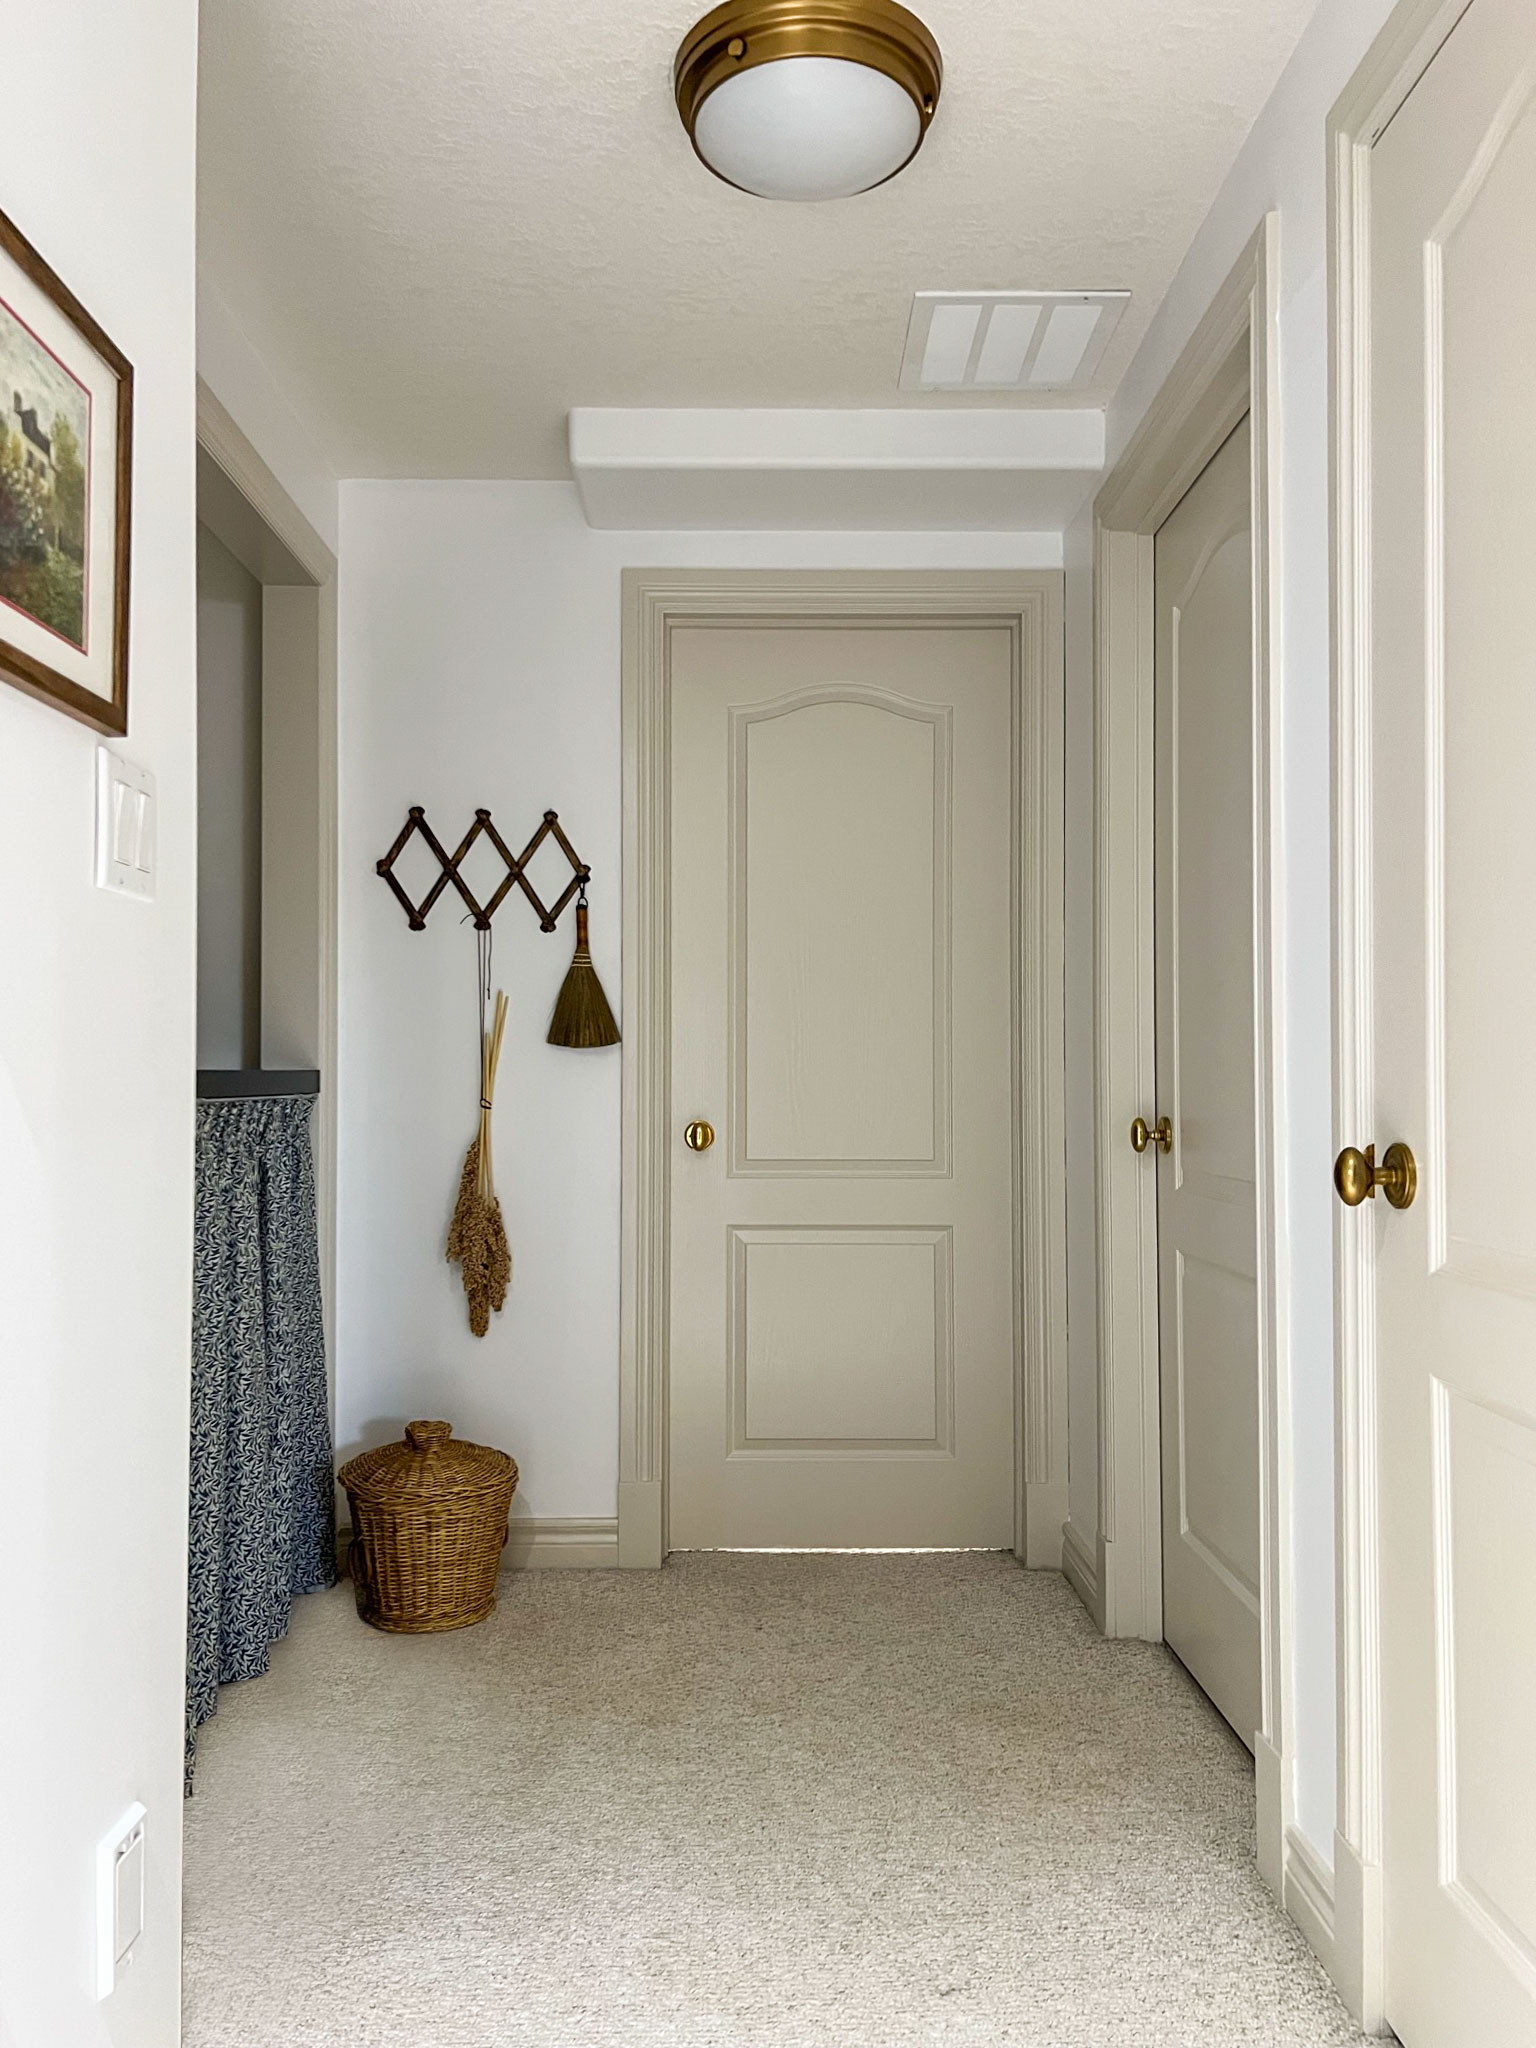 hallway with beige contrast trim and doors and white walls, accordian style hanger on wall with a broom hanging and basket on the floor, laundry closet with countertop curtain on the left